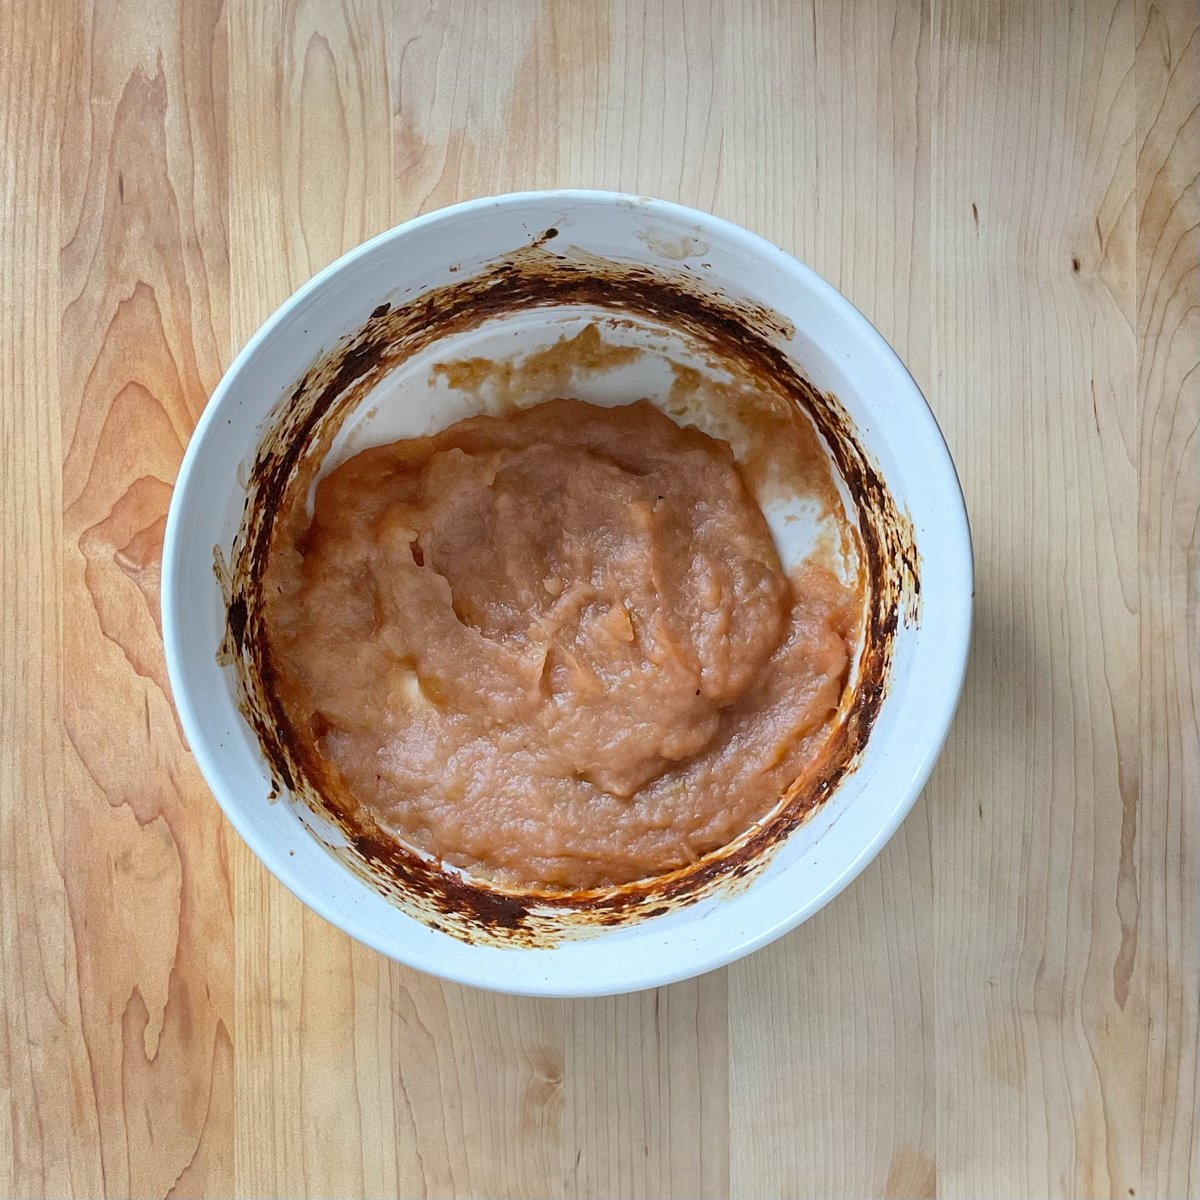 Making apple butter in the oven requires a casserole dish.